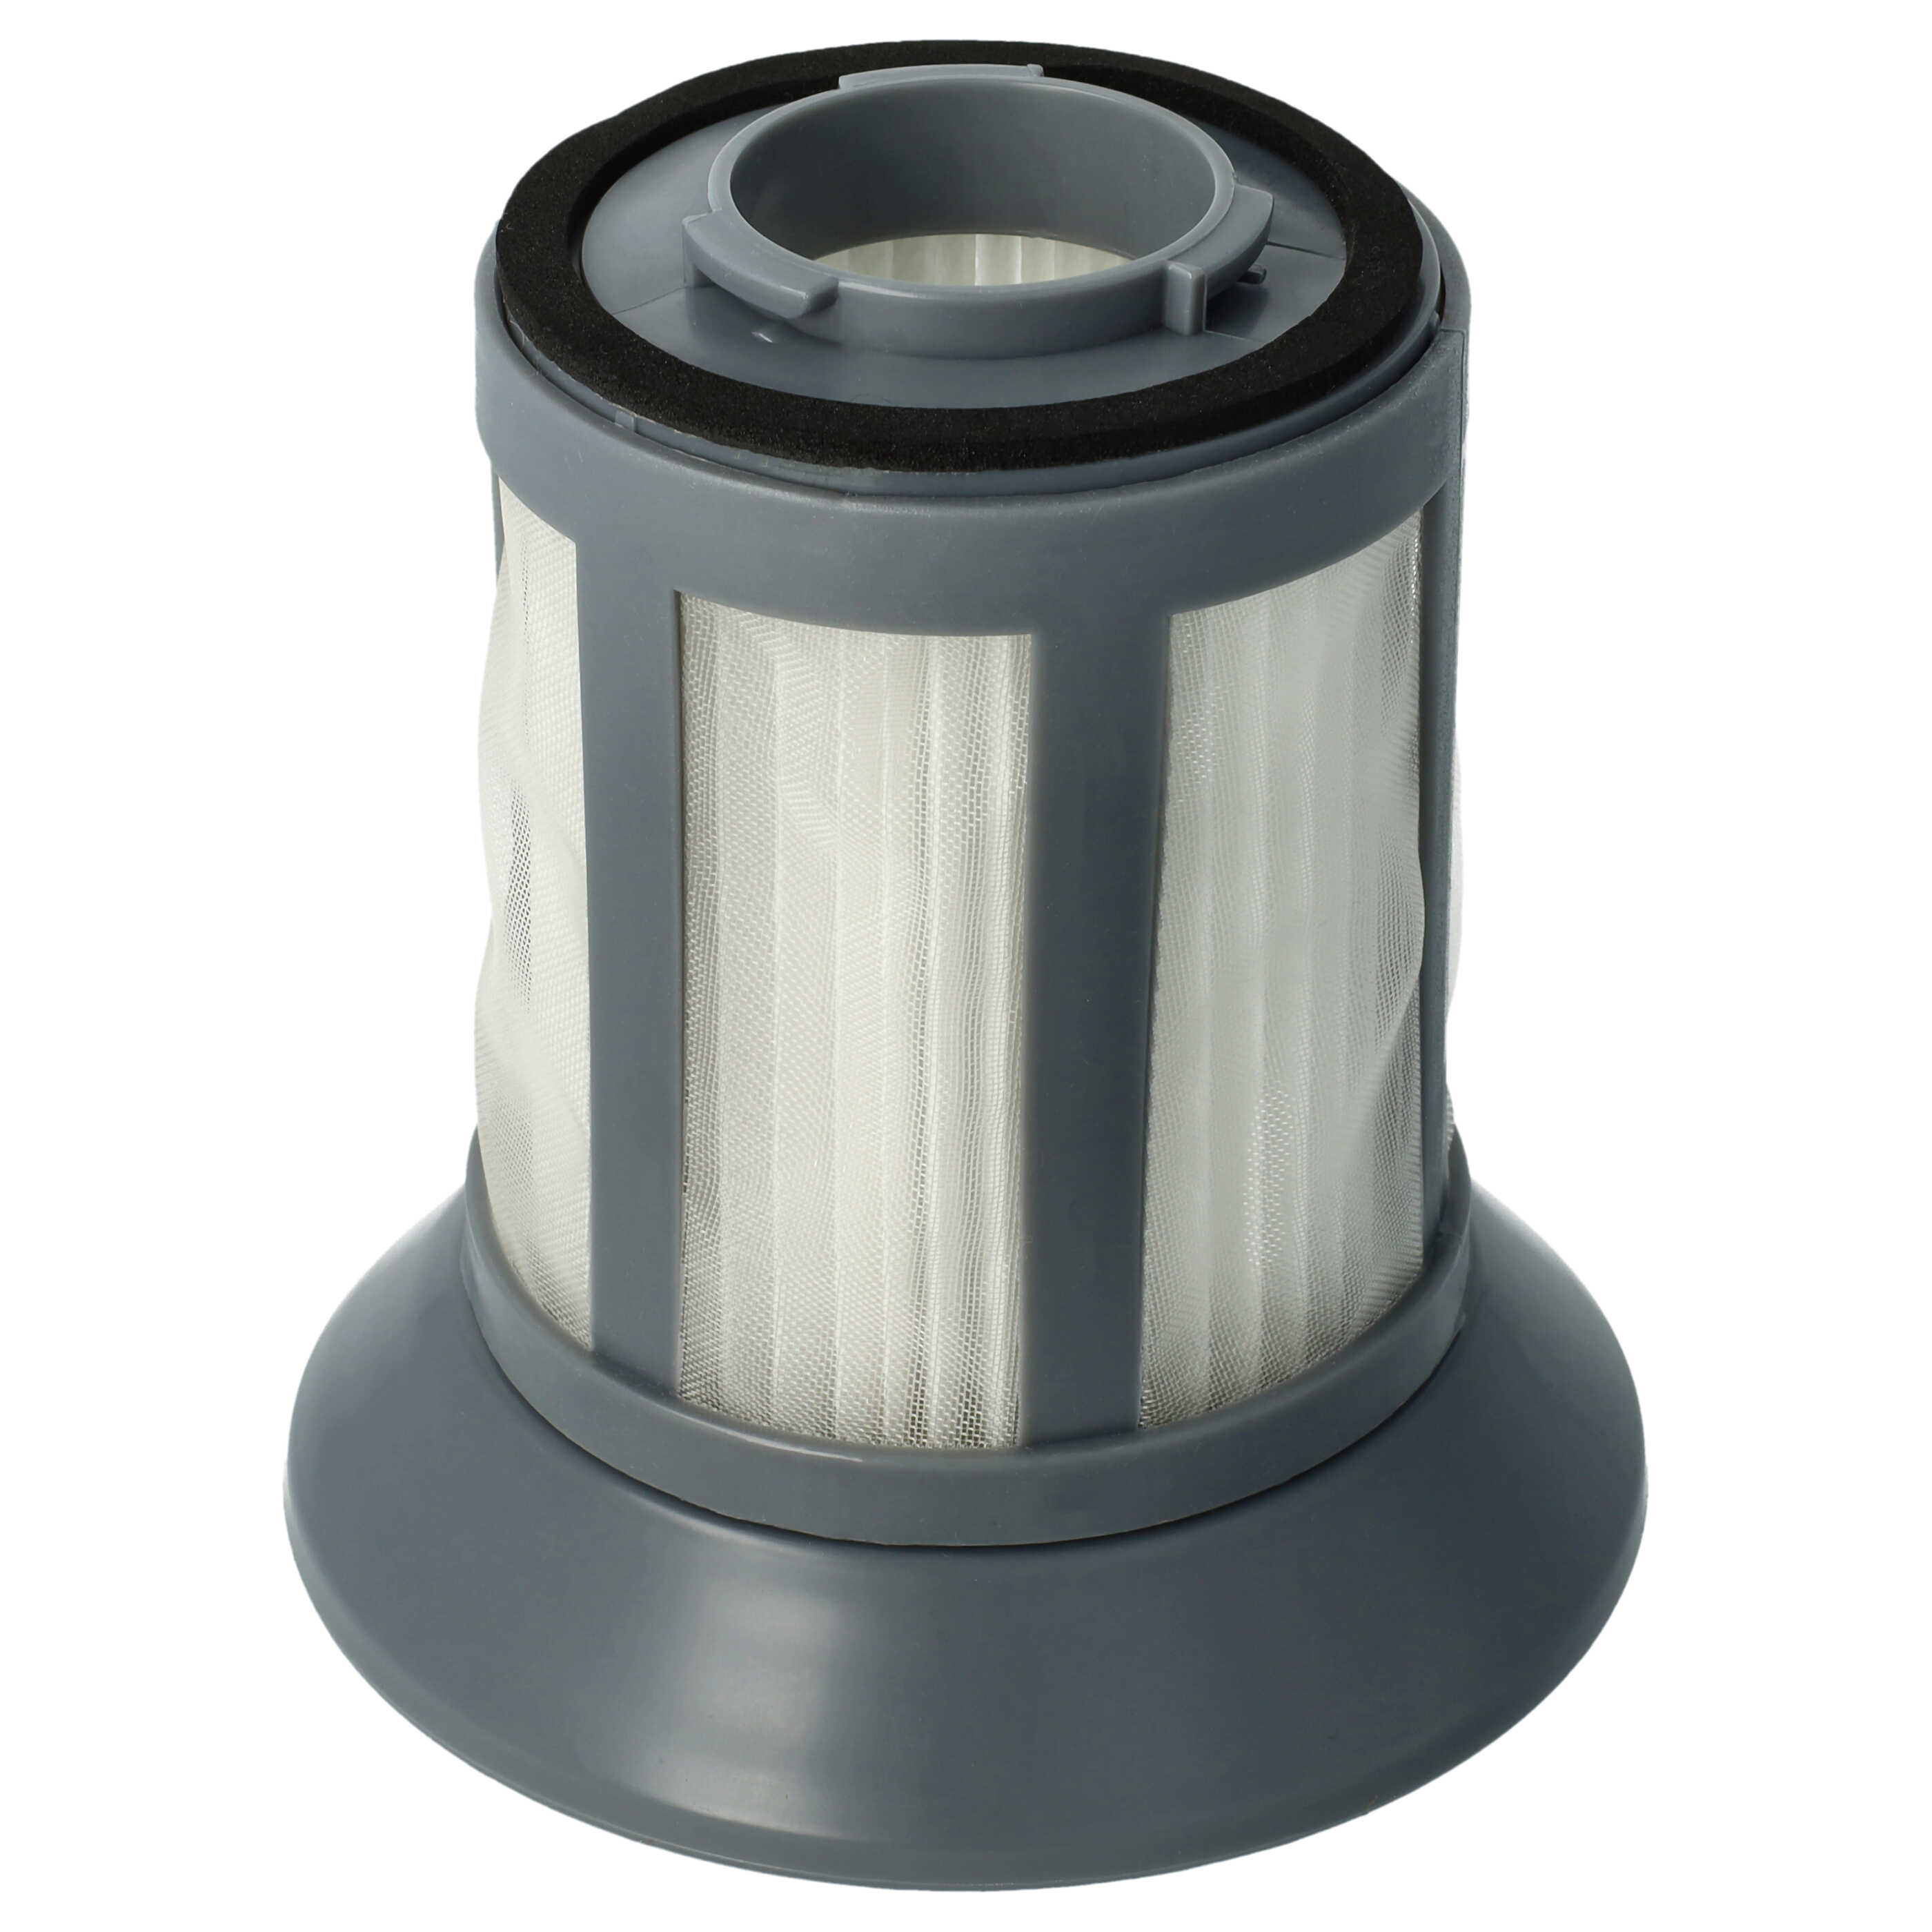 1x filter insert (nylon + HEPA filter) suitable for BS 9012 CB Eco Cyclon Bomann Vacuum Cleaner